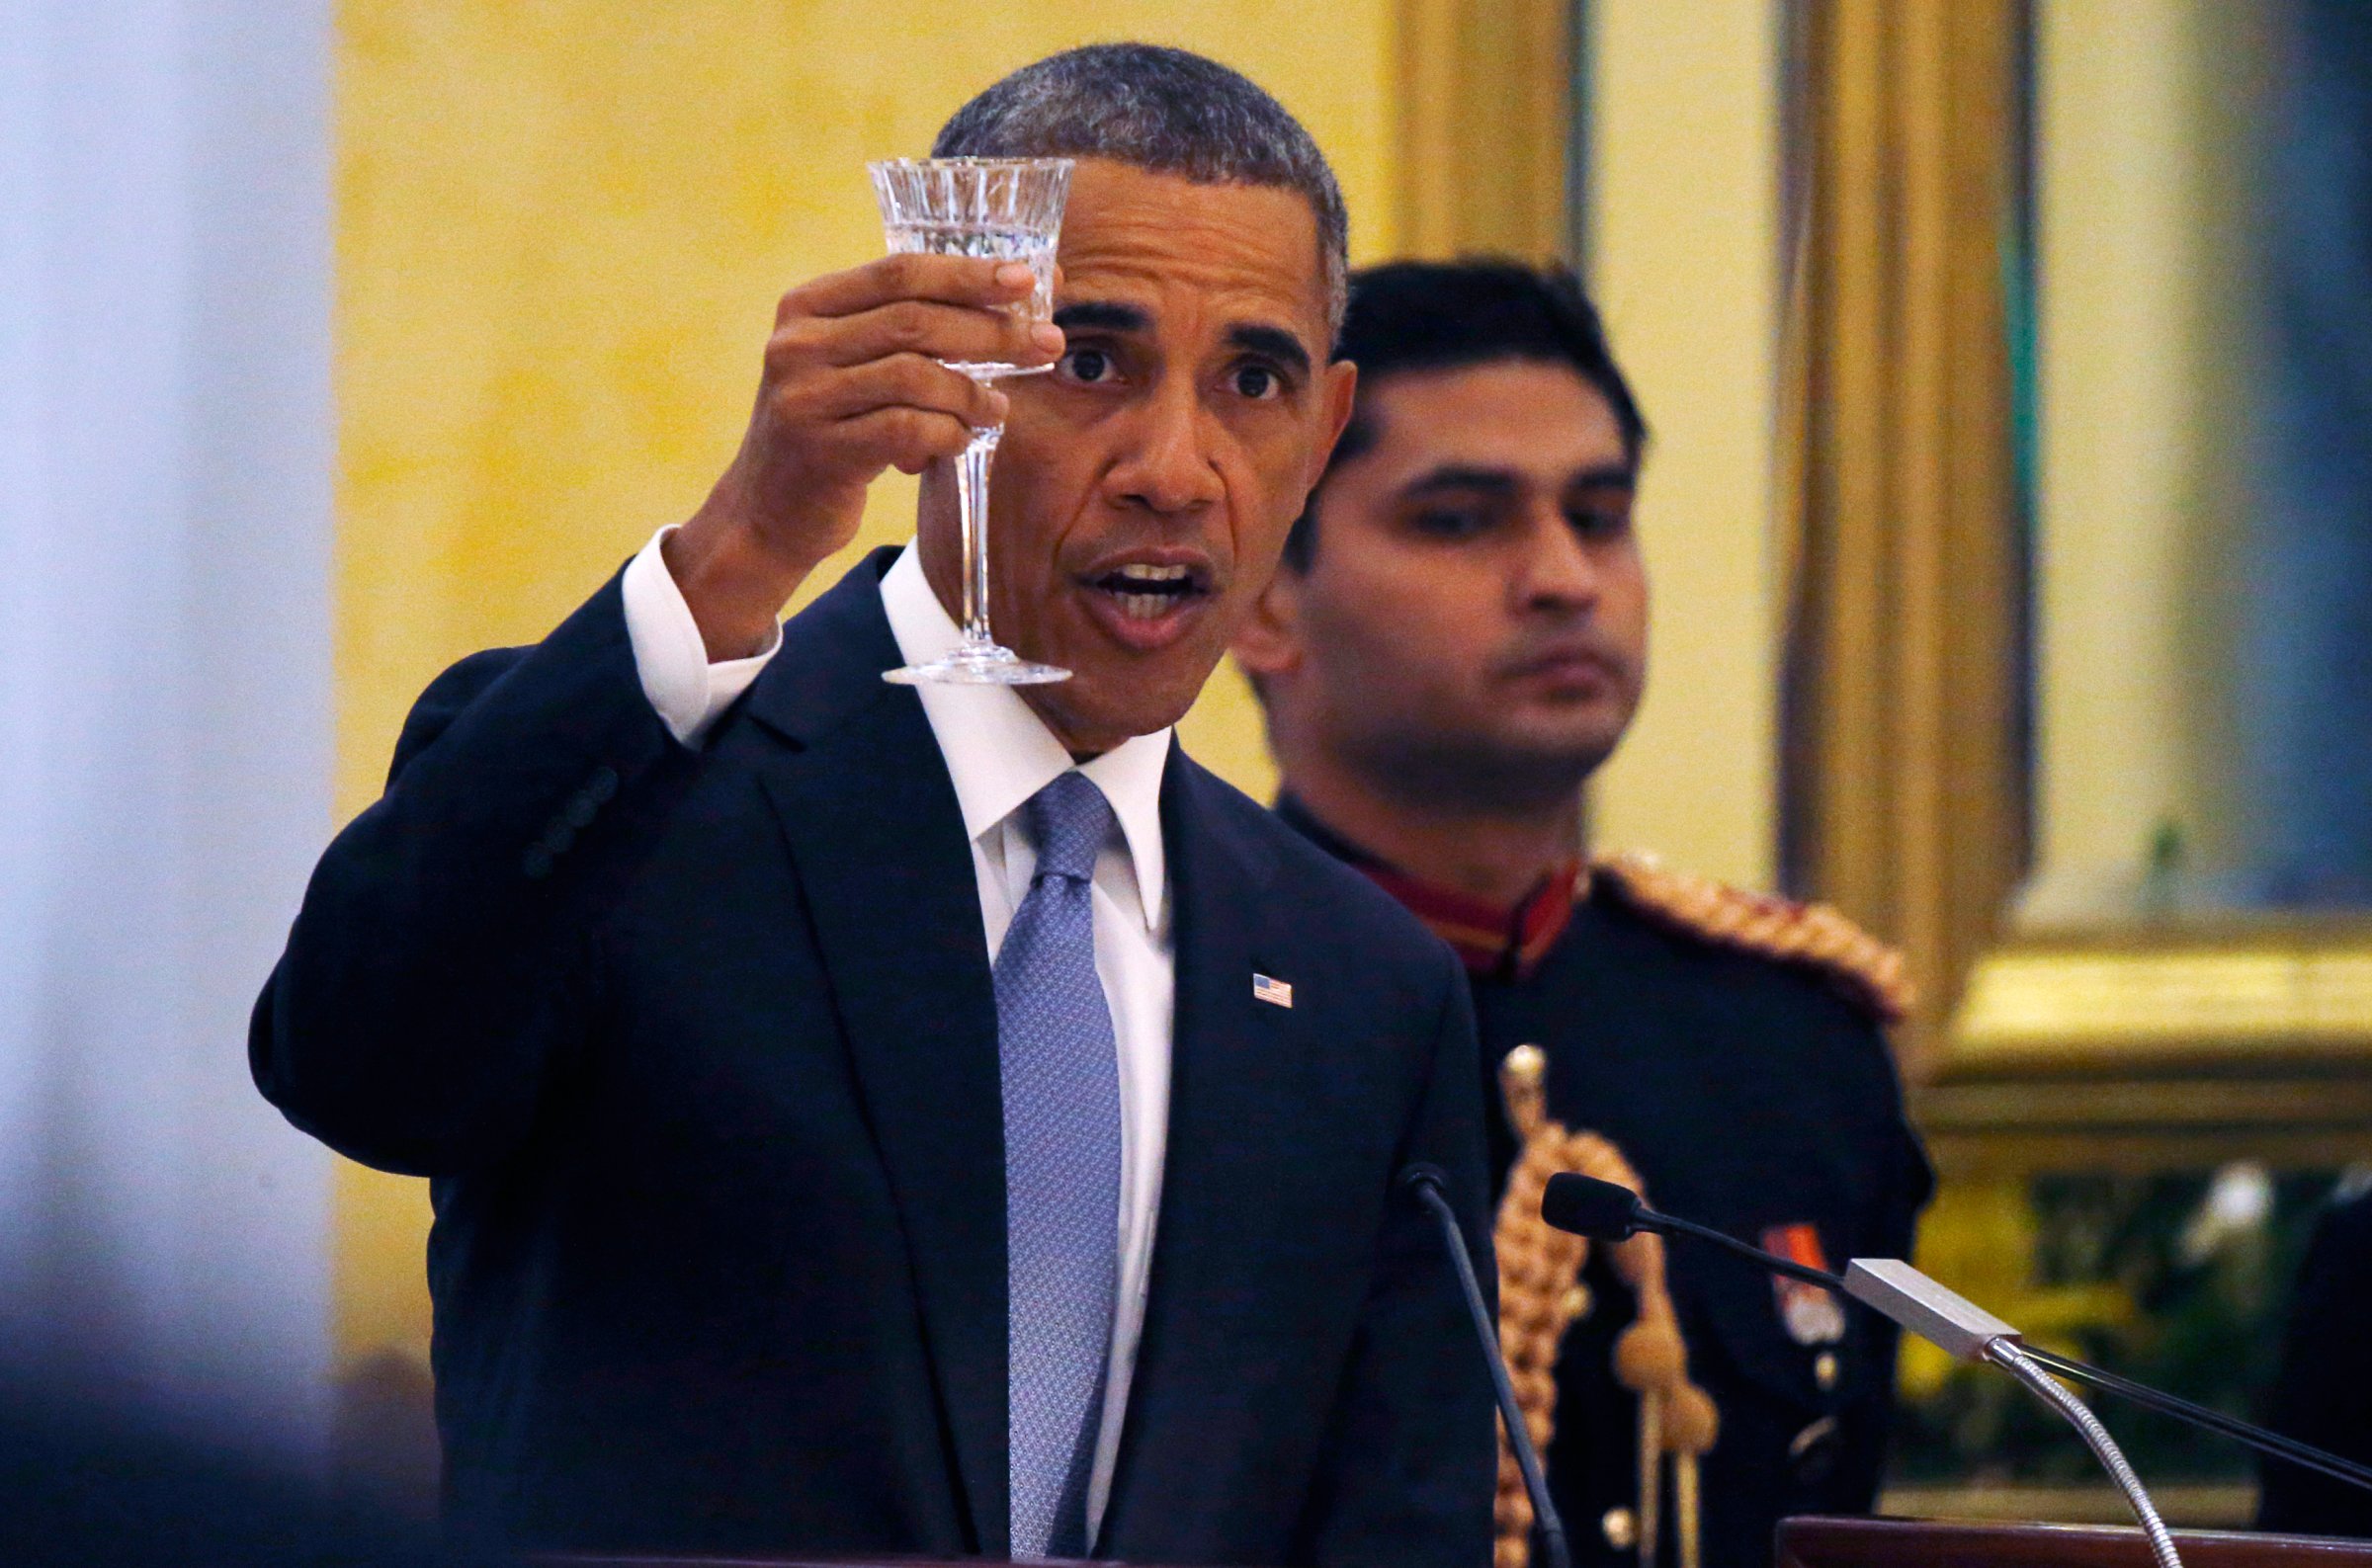 U.S. President Barack Obama delivers a toast as he attends an Official State Dinner at the Rashtrapati Bhavan presidential palace in New Delhi